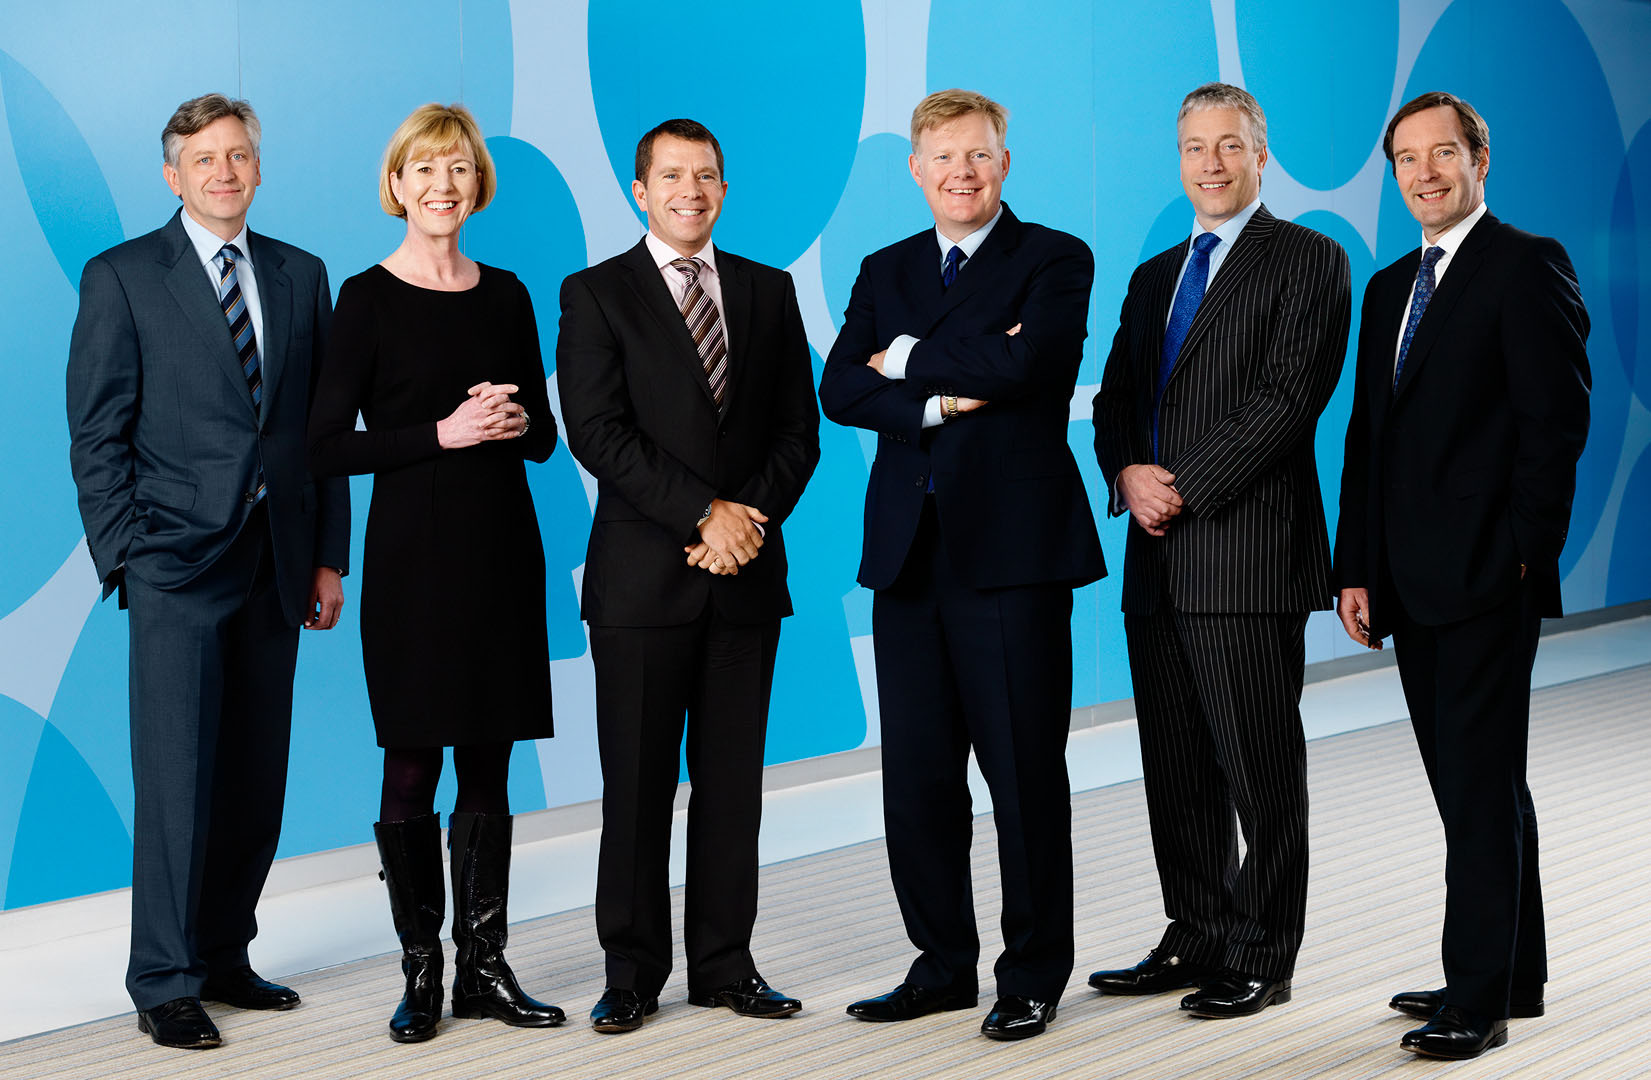 Group shot of Board of Directors with patterned blue background